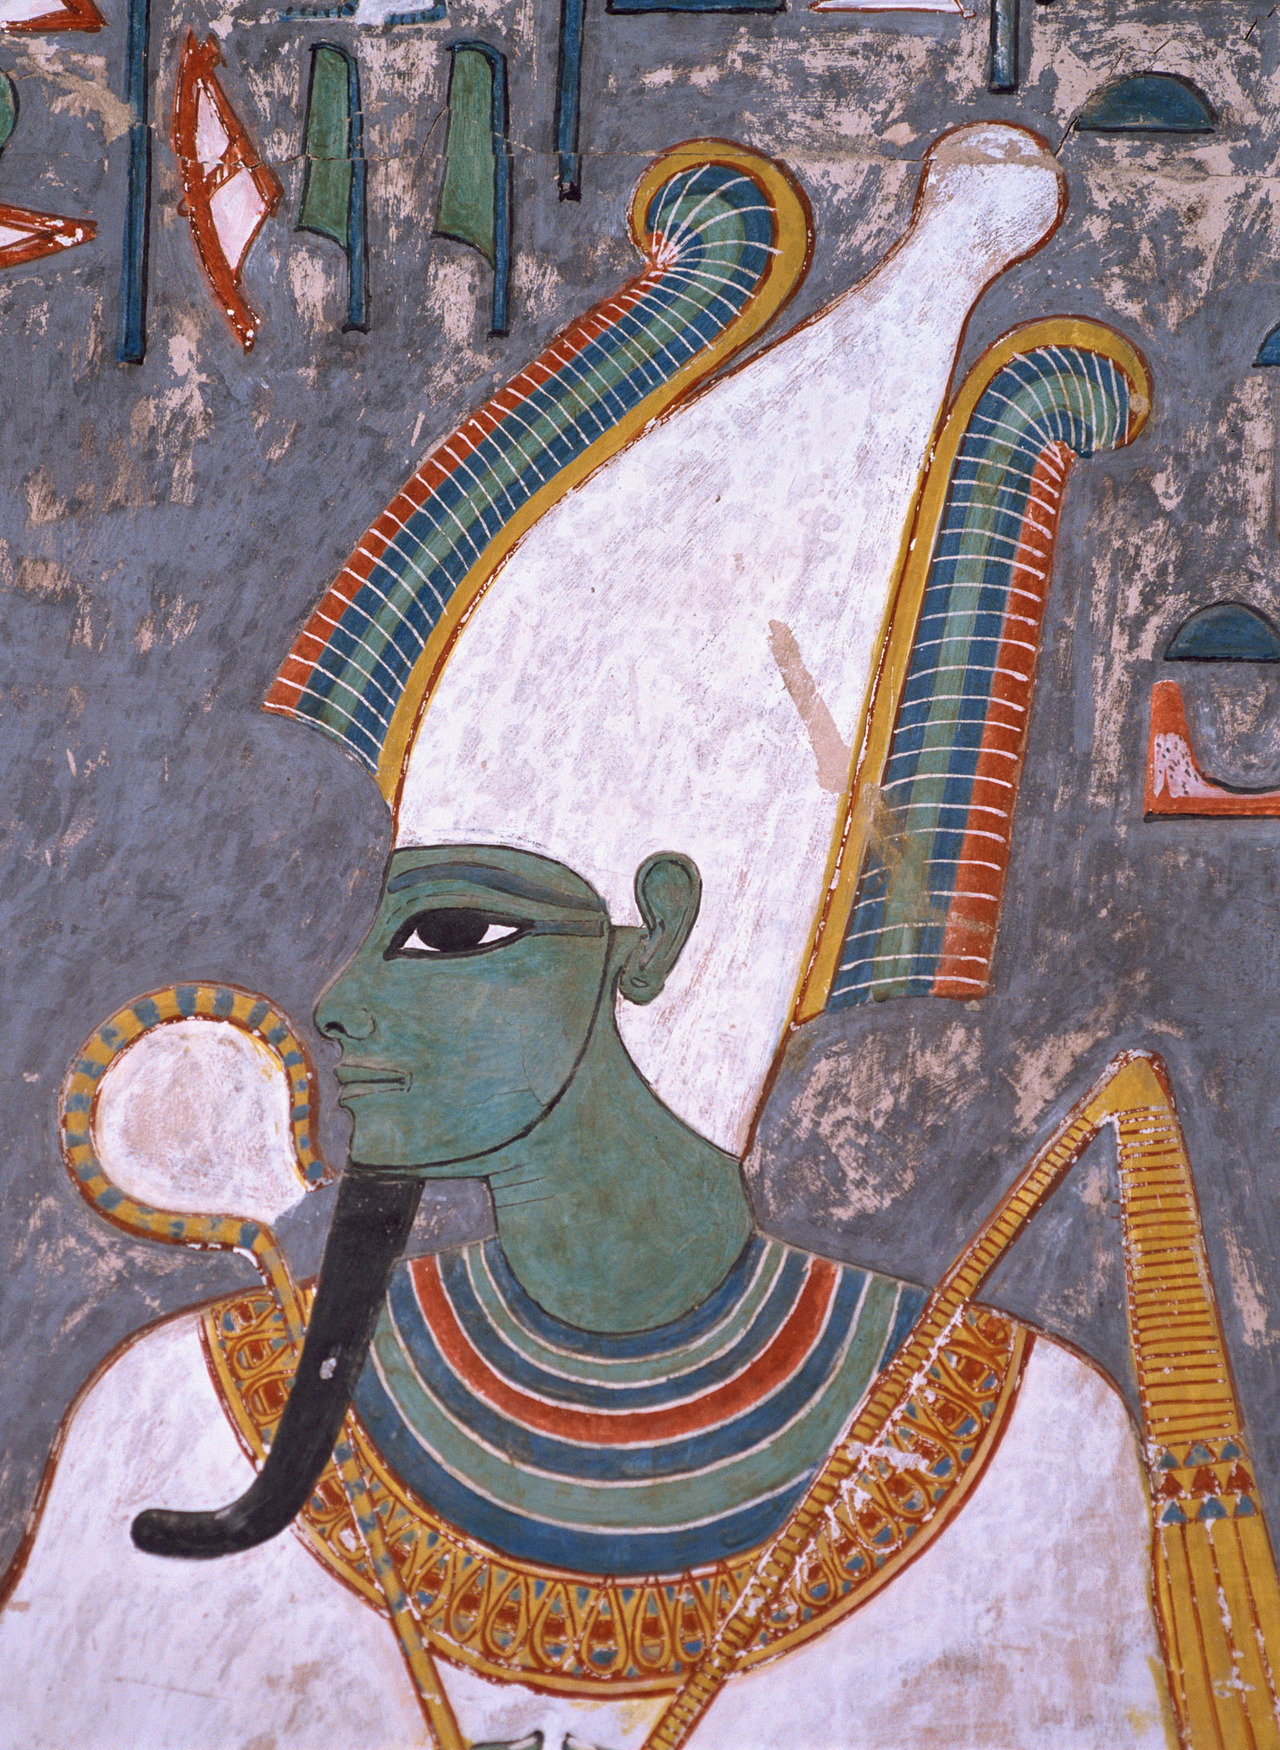 grandegyptianmuseum:
“Osiris, god of the afterlife, the underworld, and the dead. Detail of a wall painting from the Tomb of Horemheb (KV57). New Kingdom, 18th Dynasty, ca. 1306-1292 BC. Valley of the Kings, West Thebes.
”